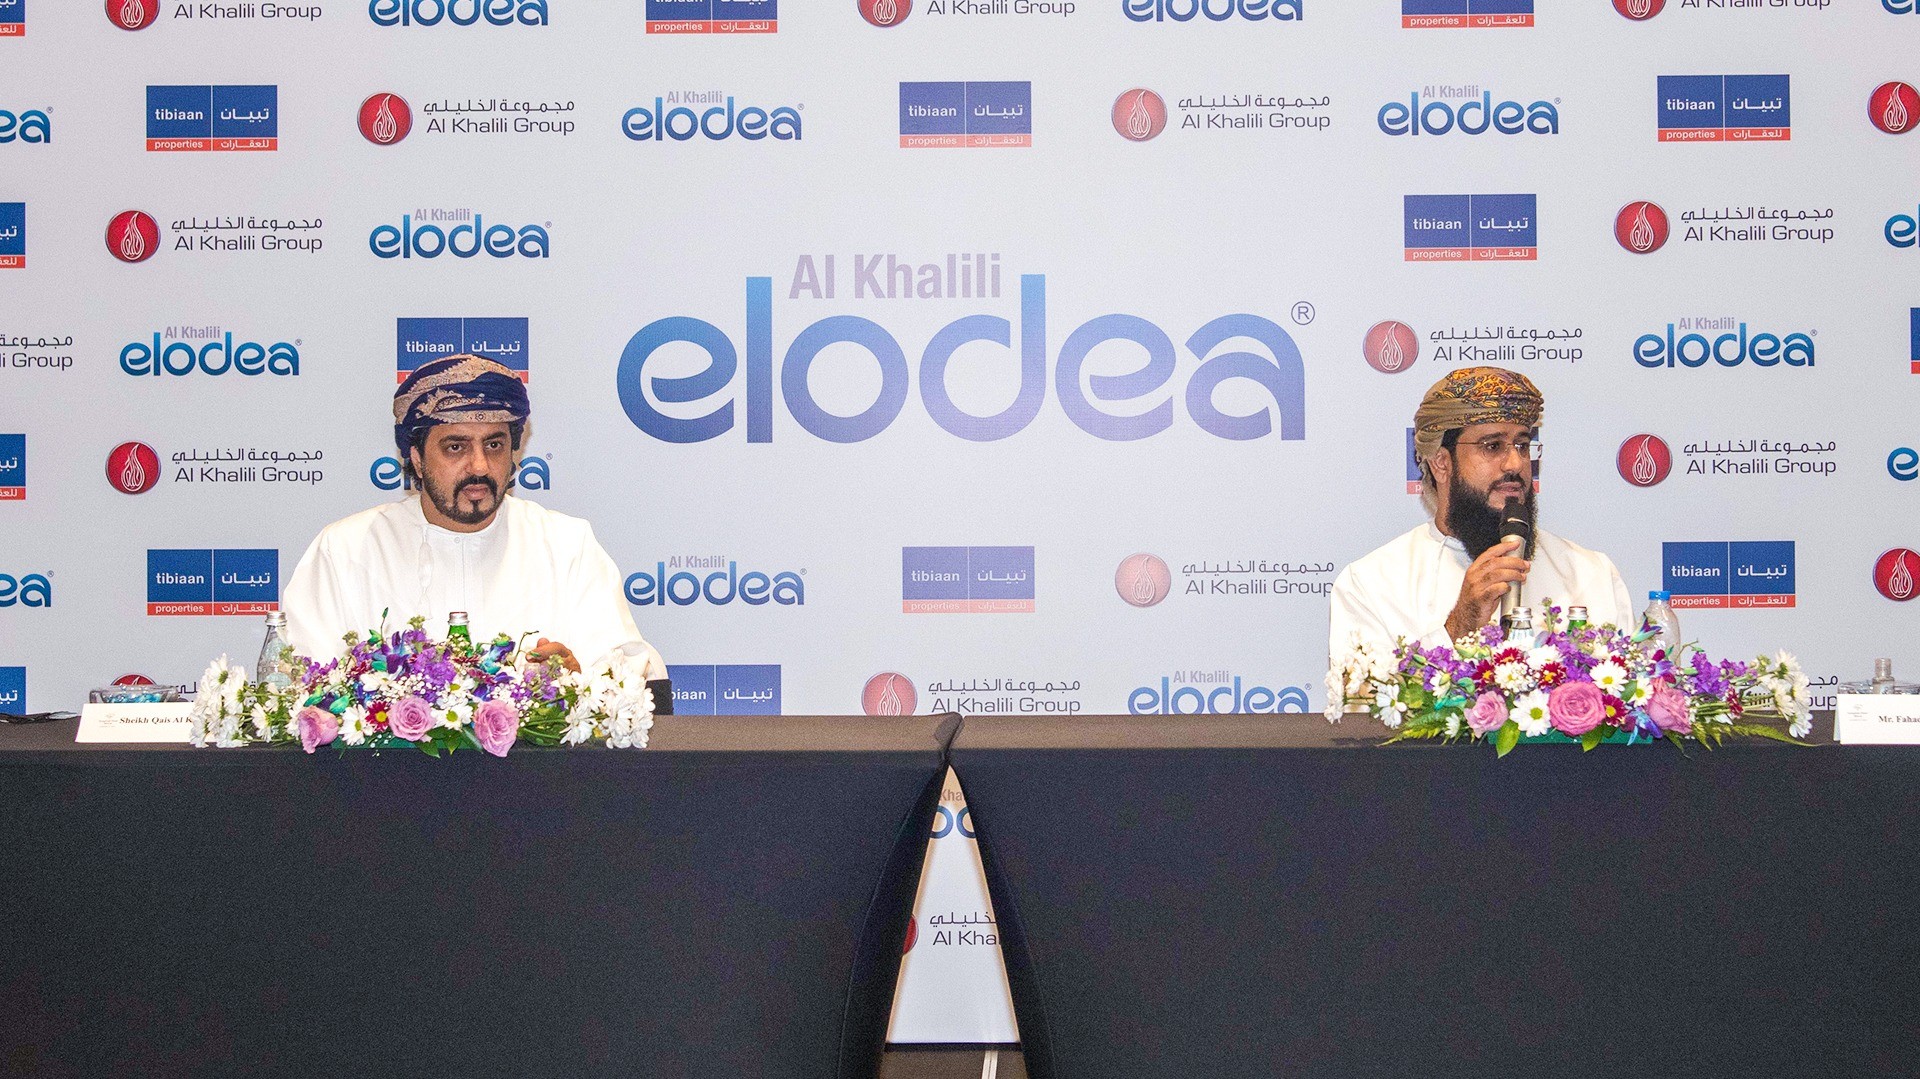 OMR 18M project “elodea” all set to launch by year end